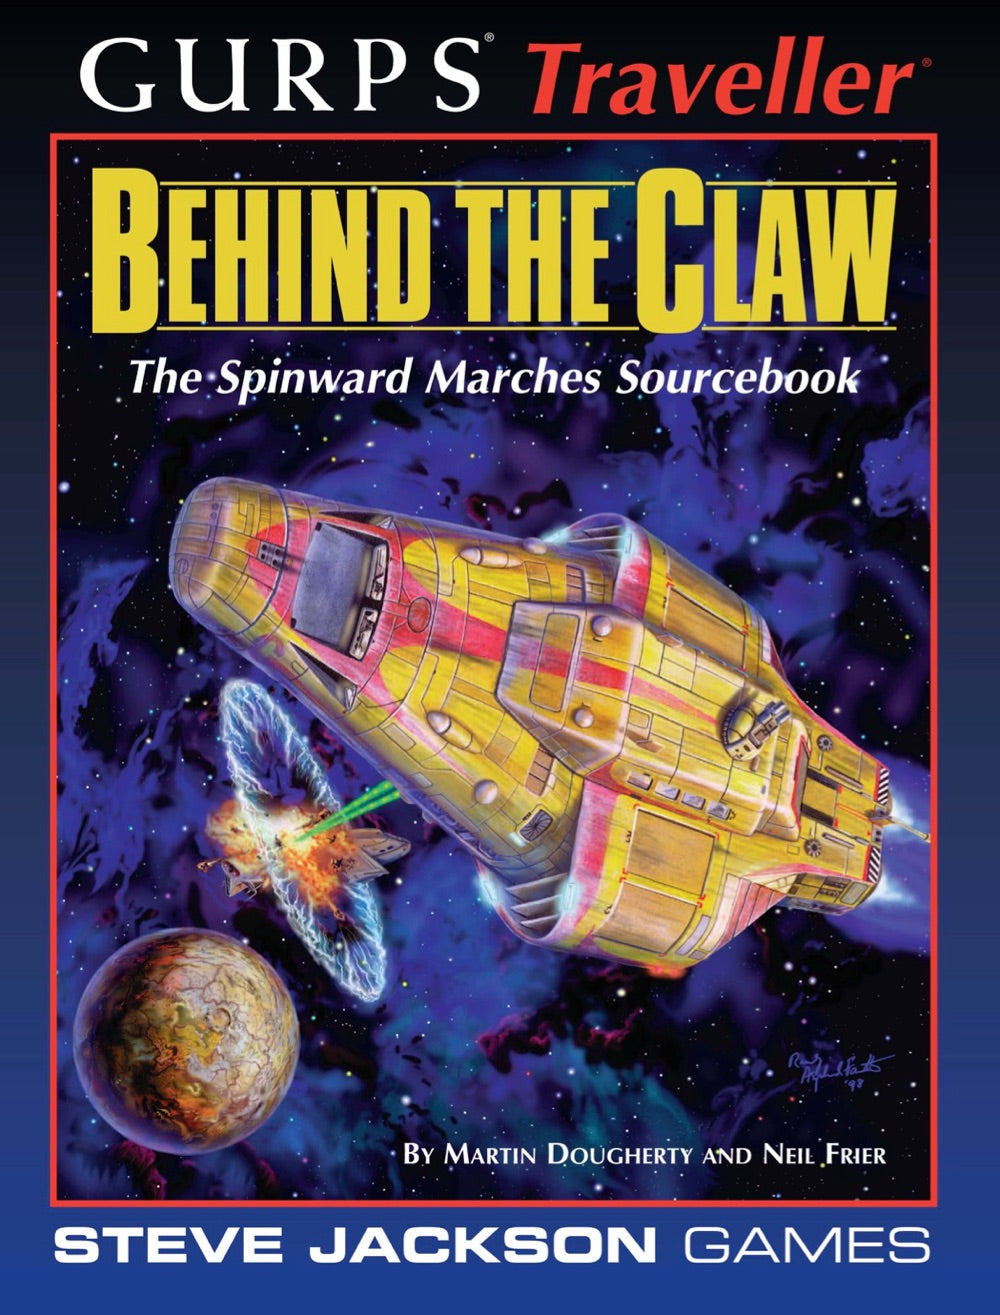 GURPS Traveller Classic: Behind the Claw